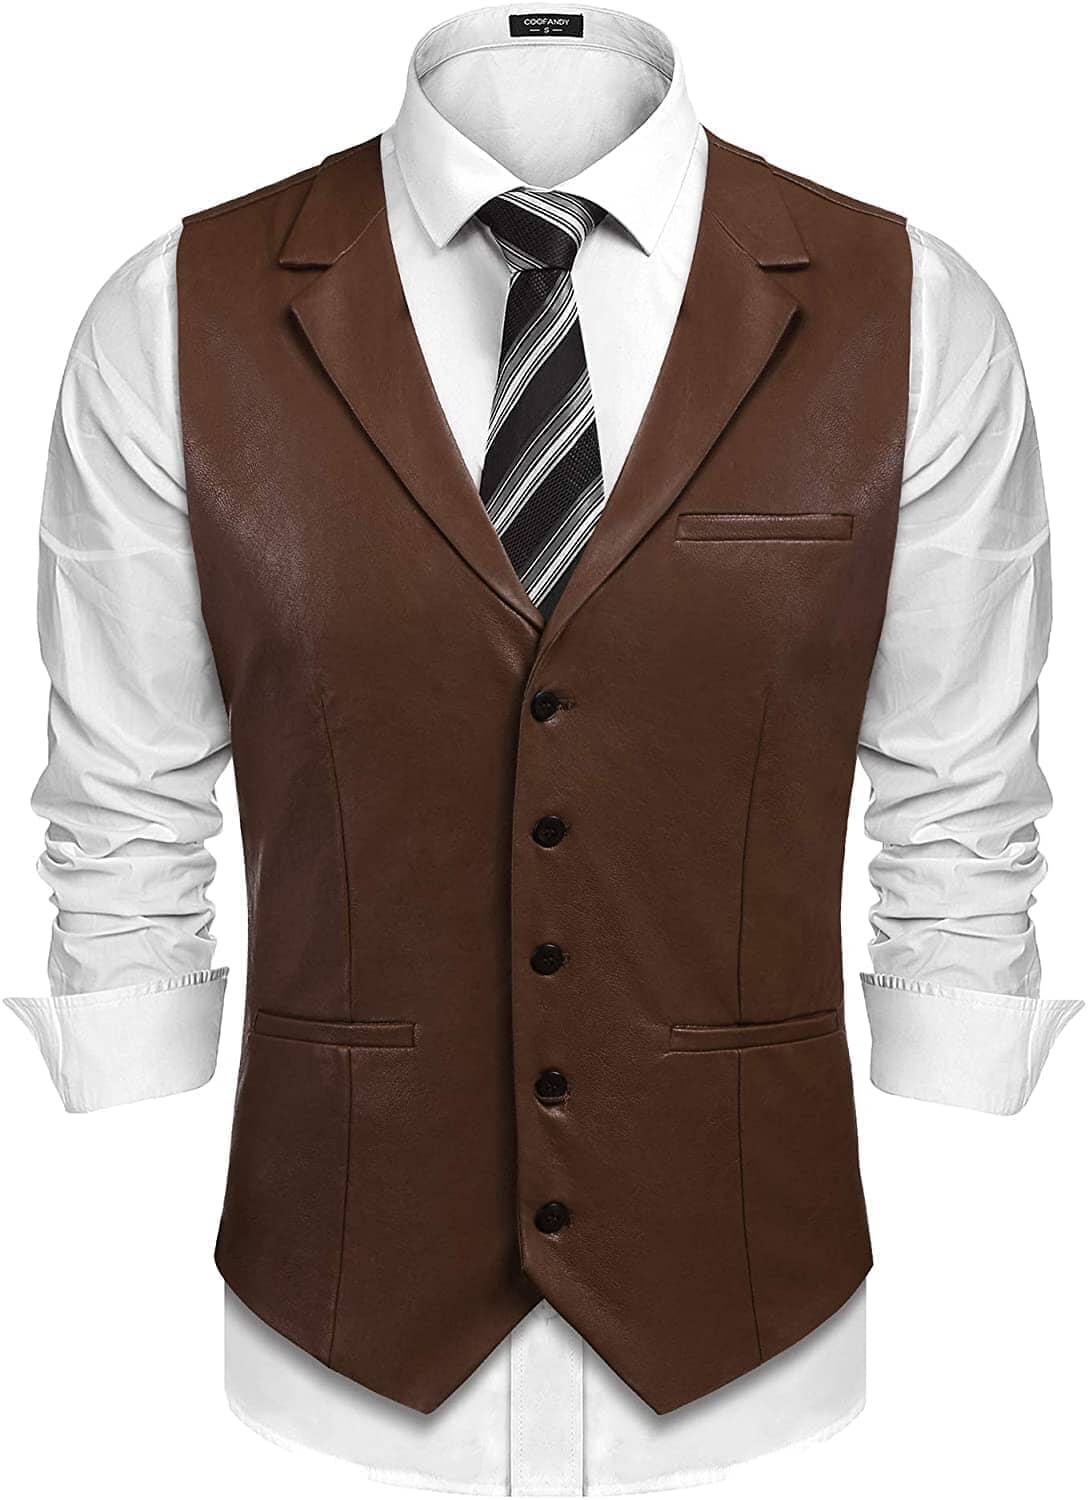 Leather Vest - High Quality, Classic American Style | US Only – coofandy